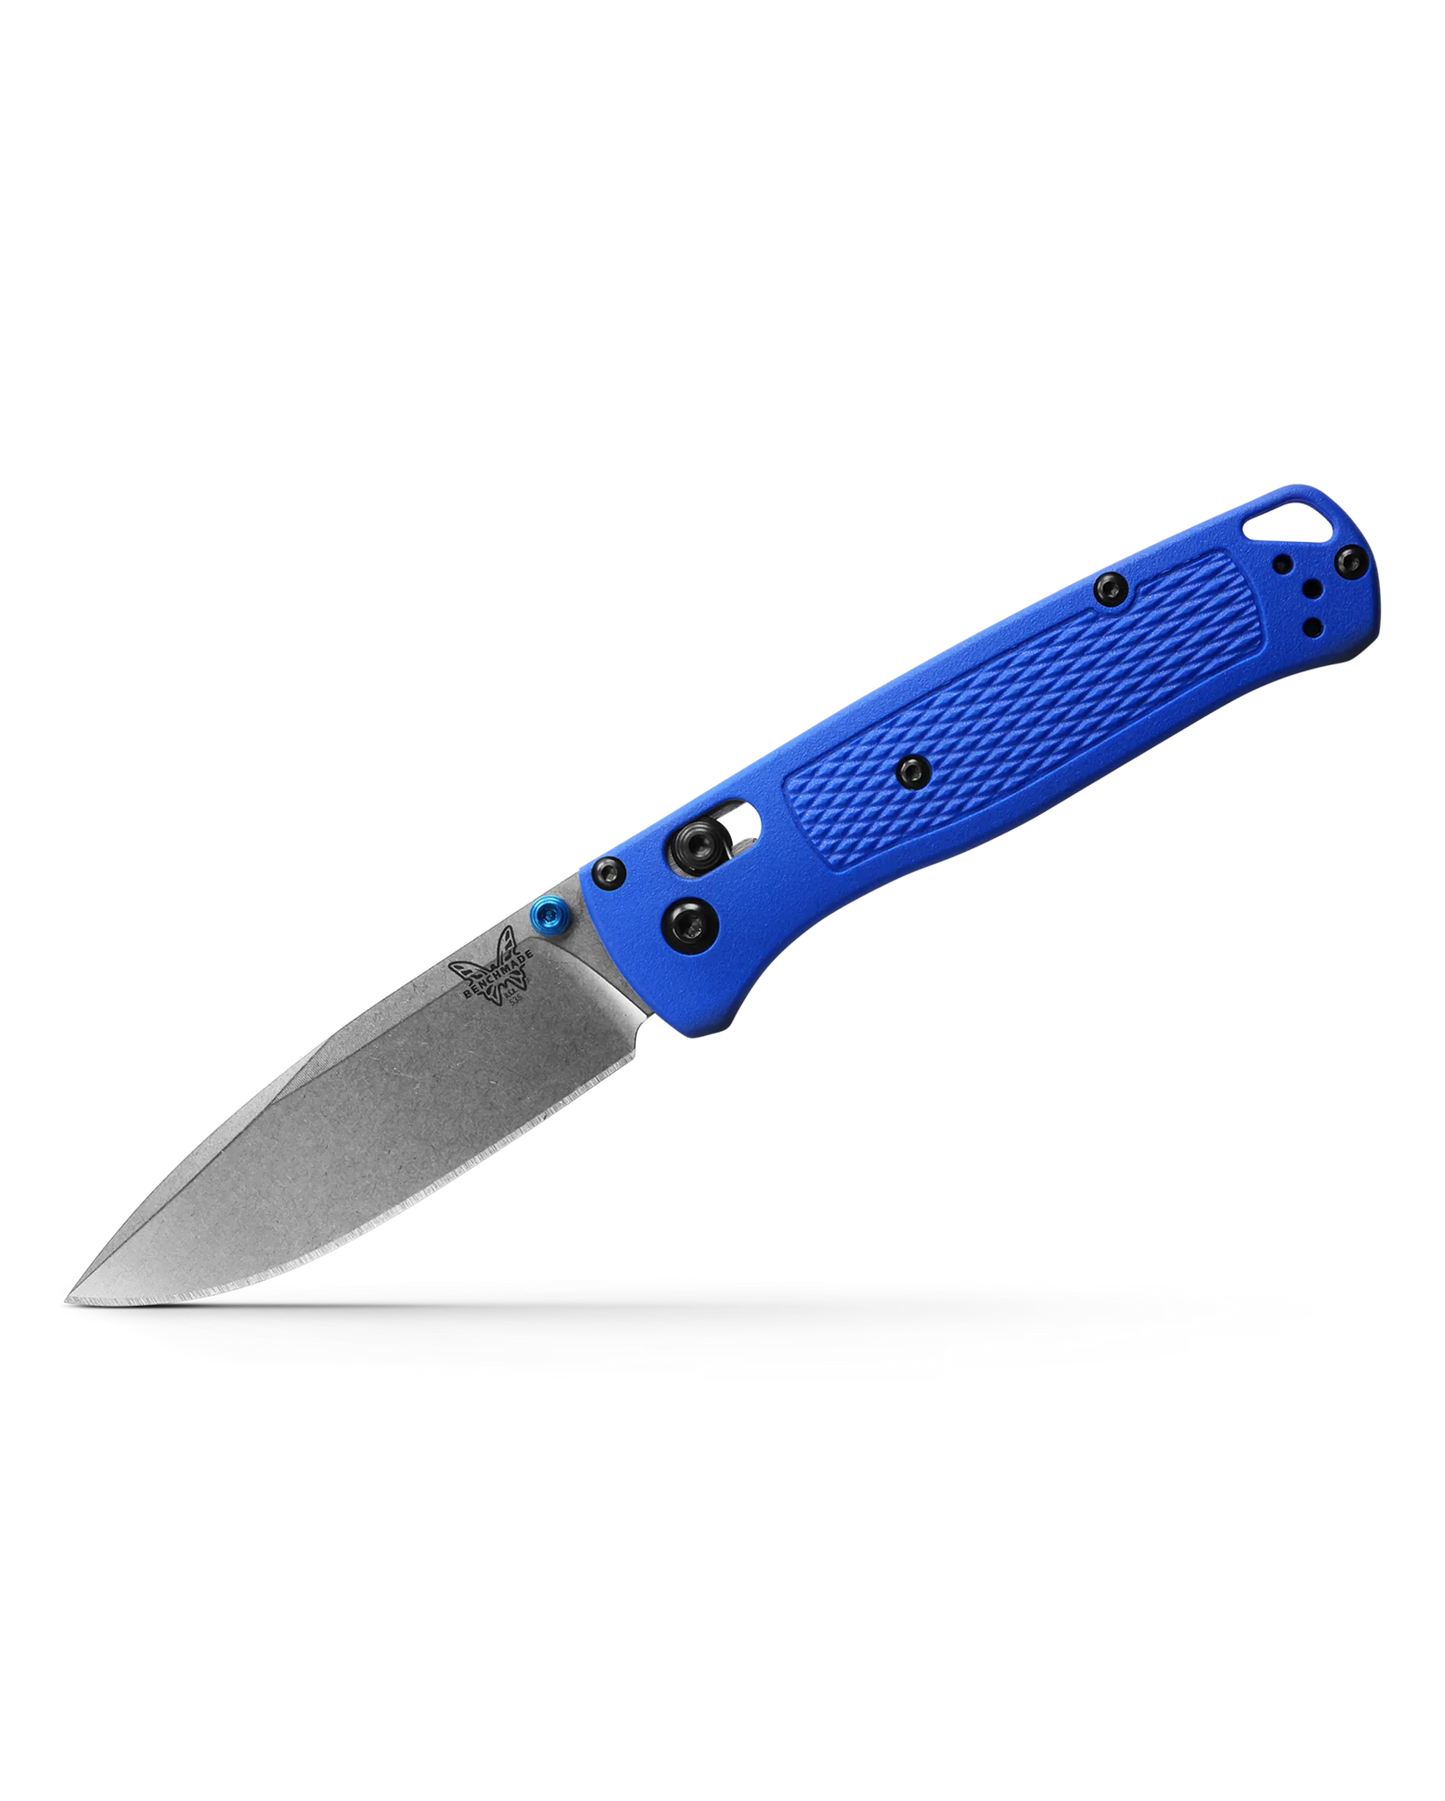 Benchmade Bugout 535 Drop-point, CPM-S30V Stahl, blue Grivory handle Benchmade Bugout 535 - EDC Taschenmesser AXIS Lock